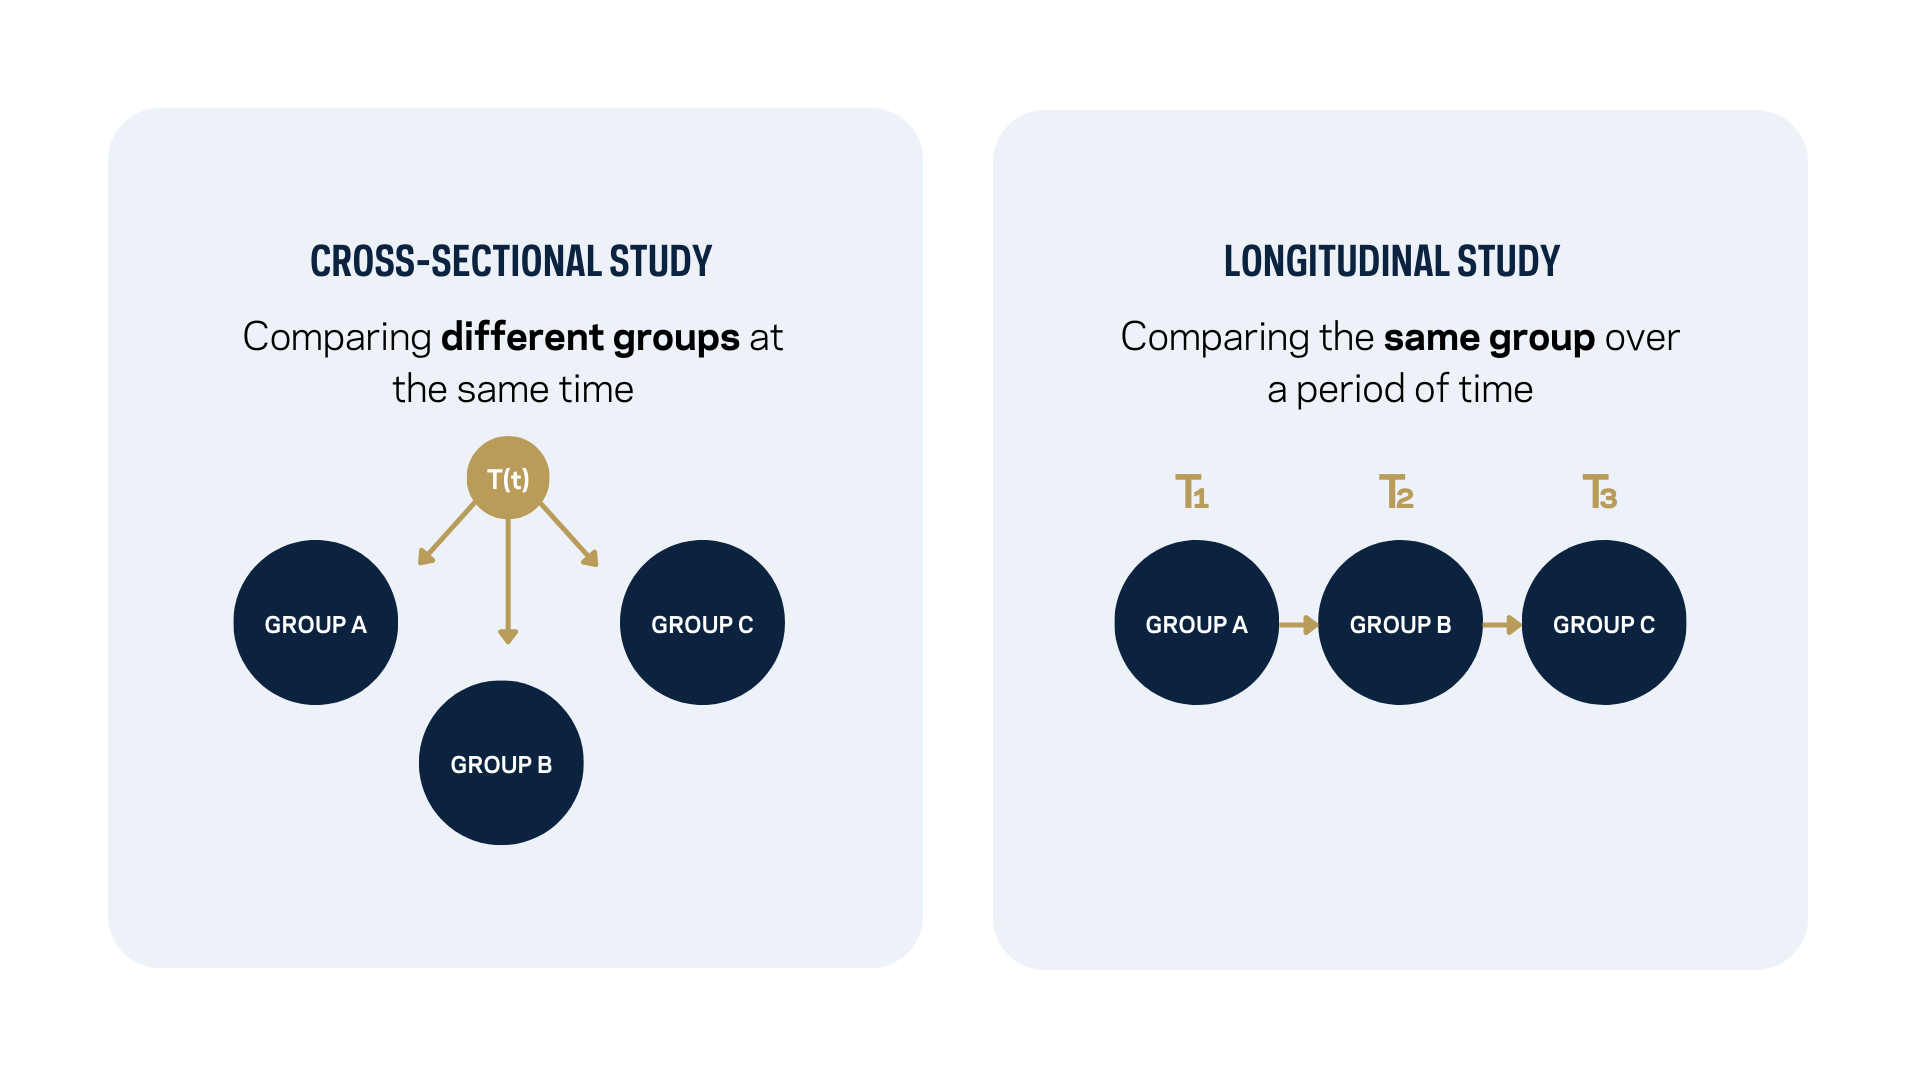 An illustration comparing cross-sectional study design, which examines different groups at one point, and longitudinal study design, which observes the same group over time.